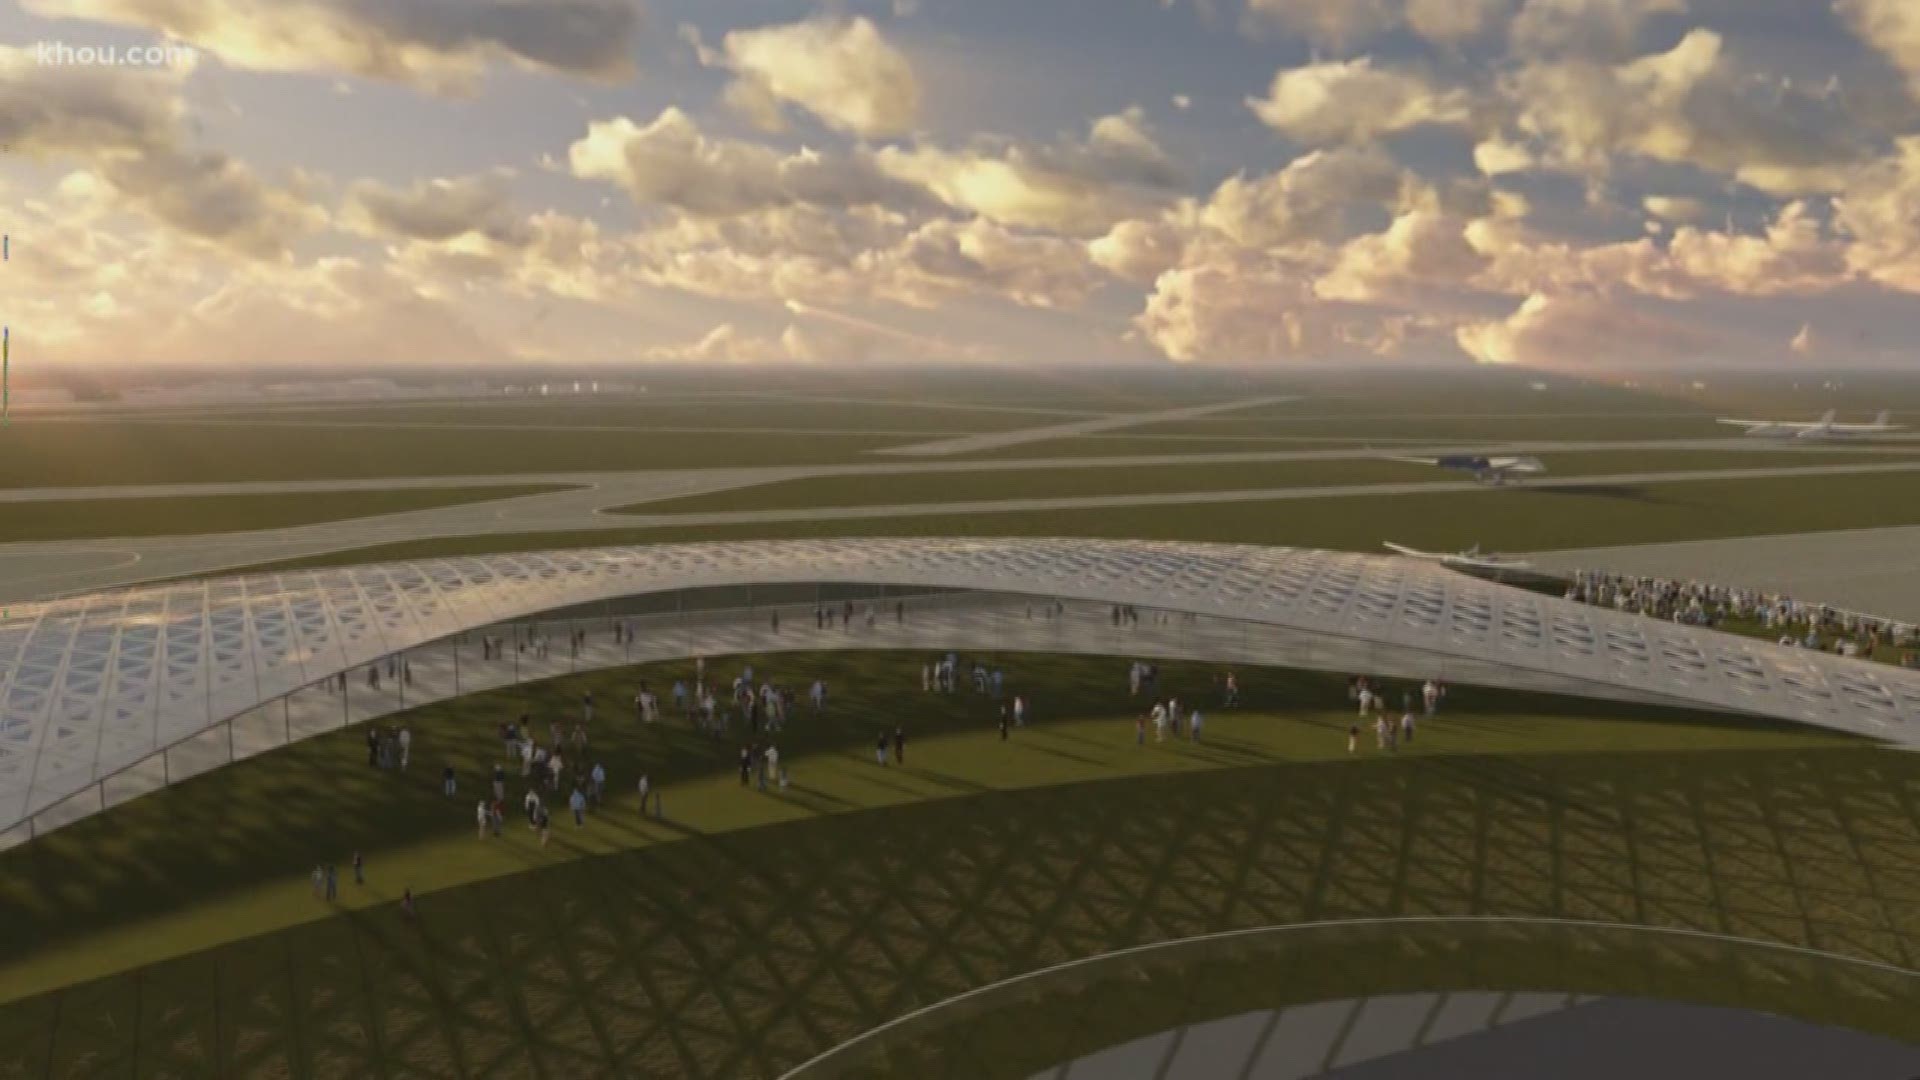 Houston's City Council approved Wednesday more than $18.8 million to put in place the beginnings of the Houston Spaceport project.